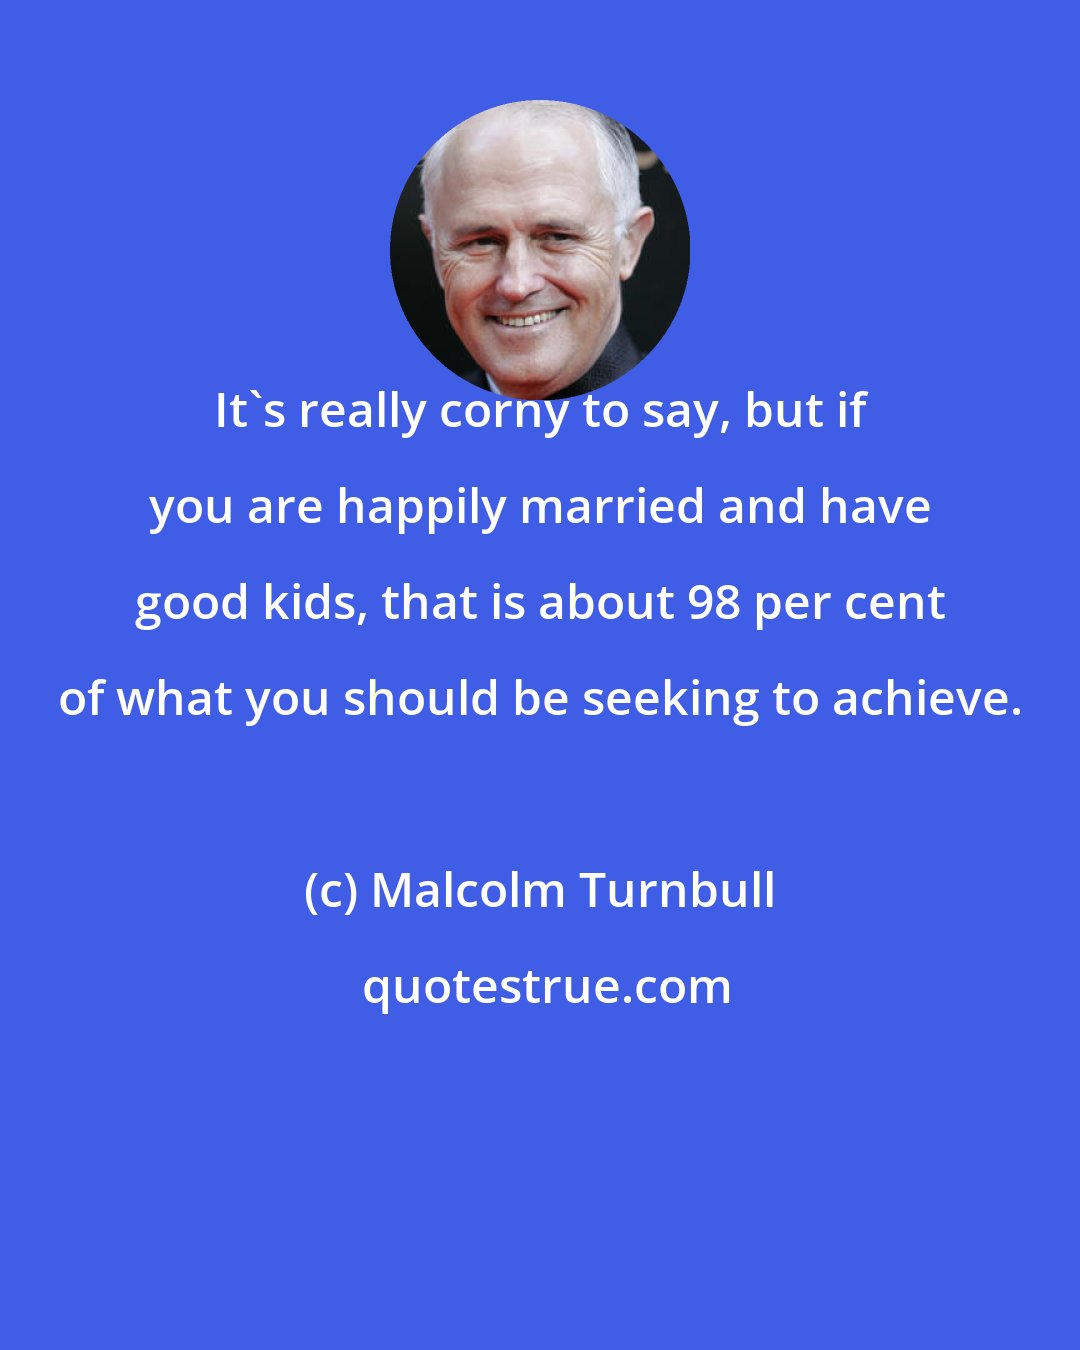 Malcolm Turnbull: It's really corny to say, but if you are happily married and have good kids, that is about 98 per cent of what you should be seeking to achieve.